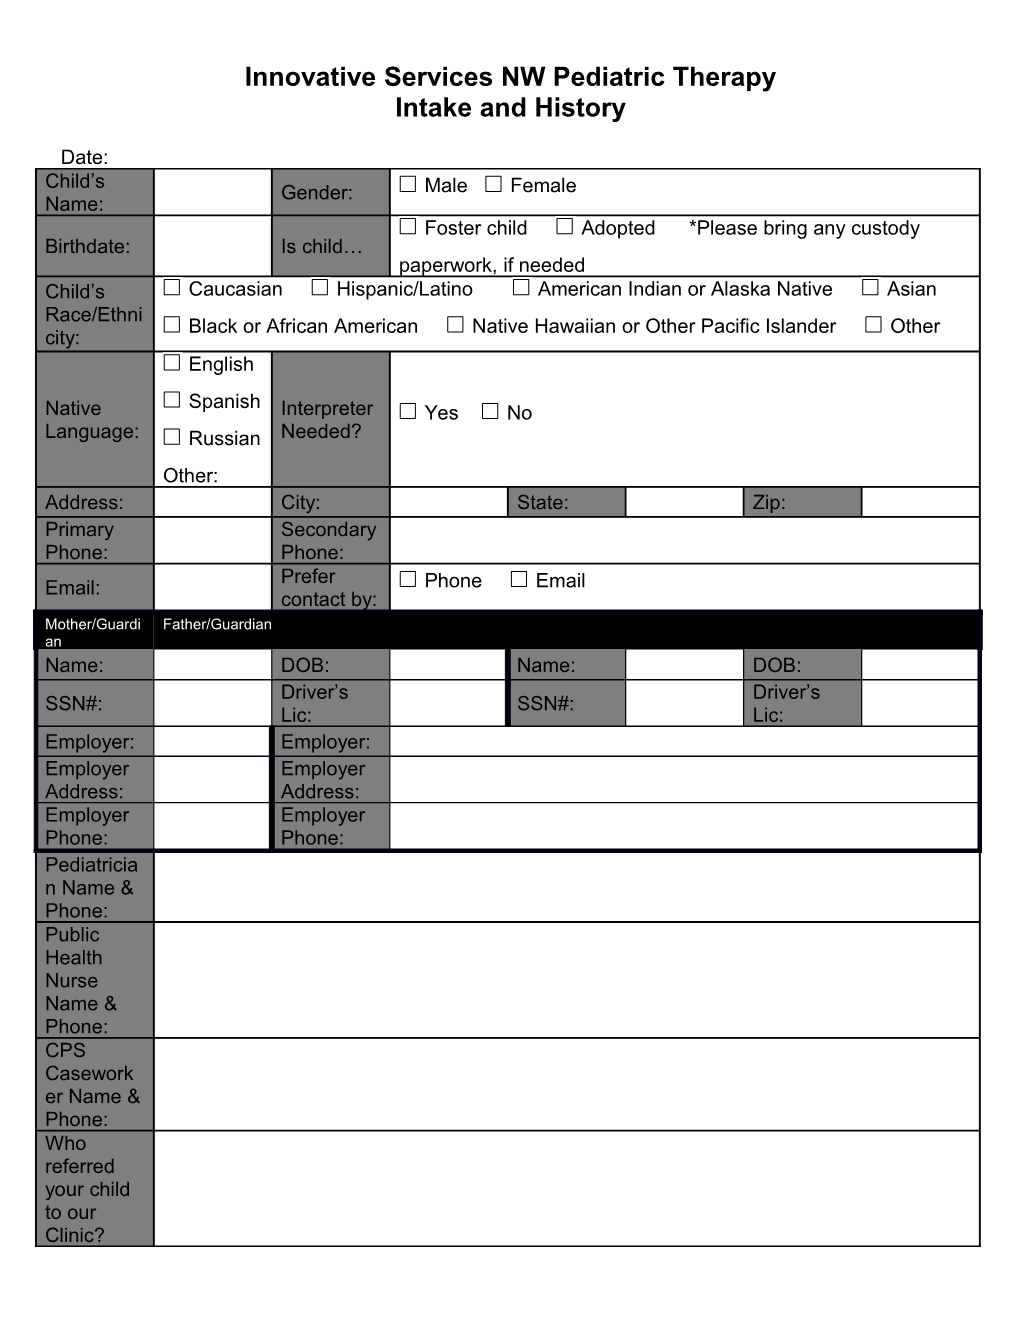 Please Fill out the Specialty Questions on the Following Pages